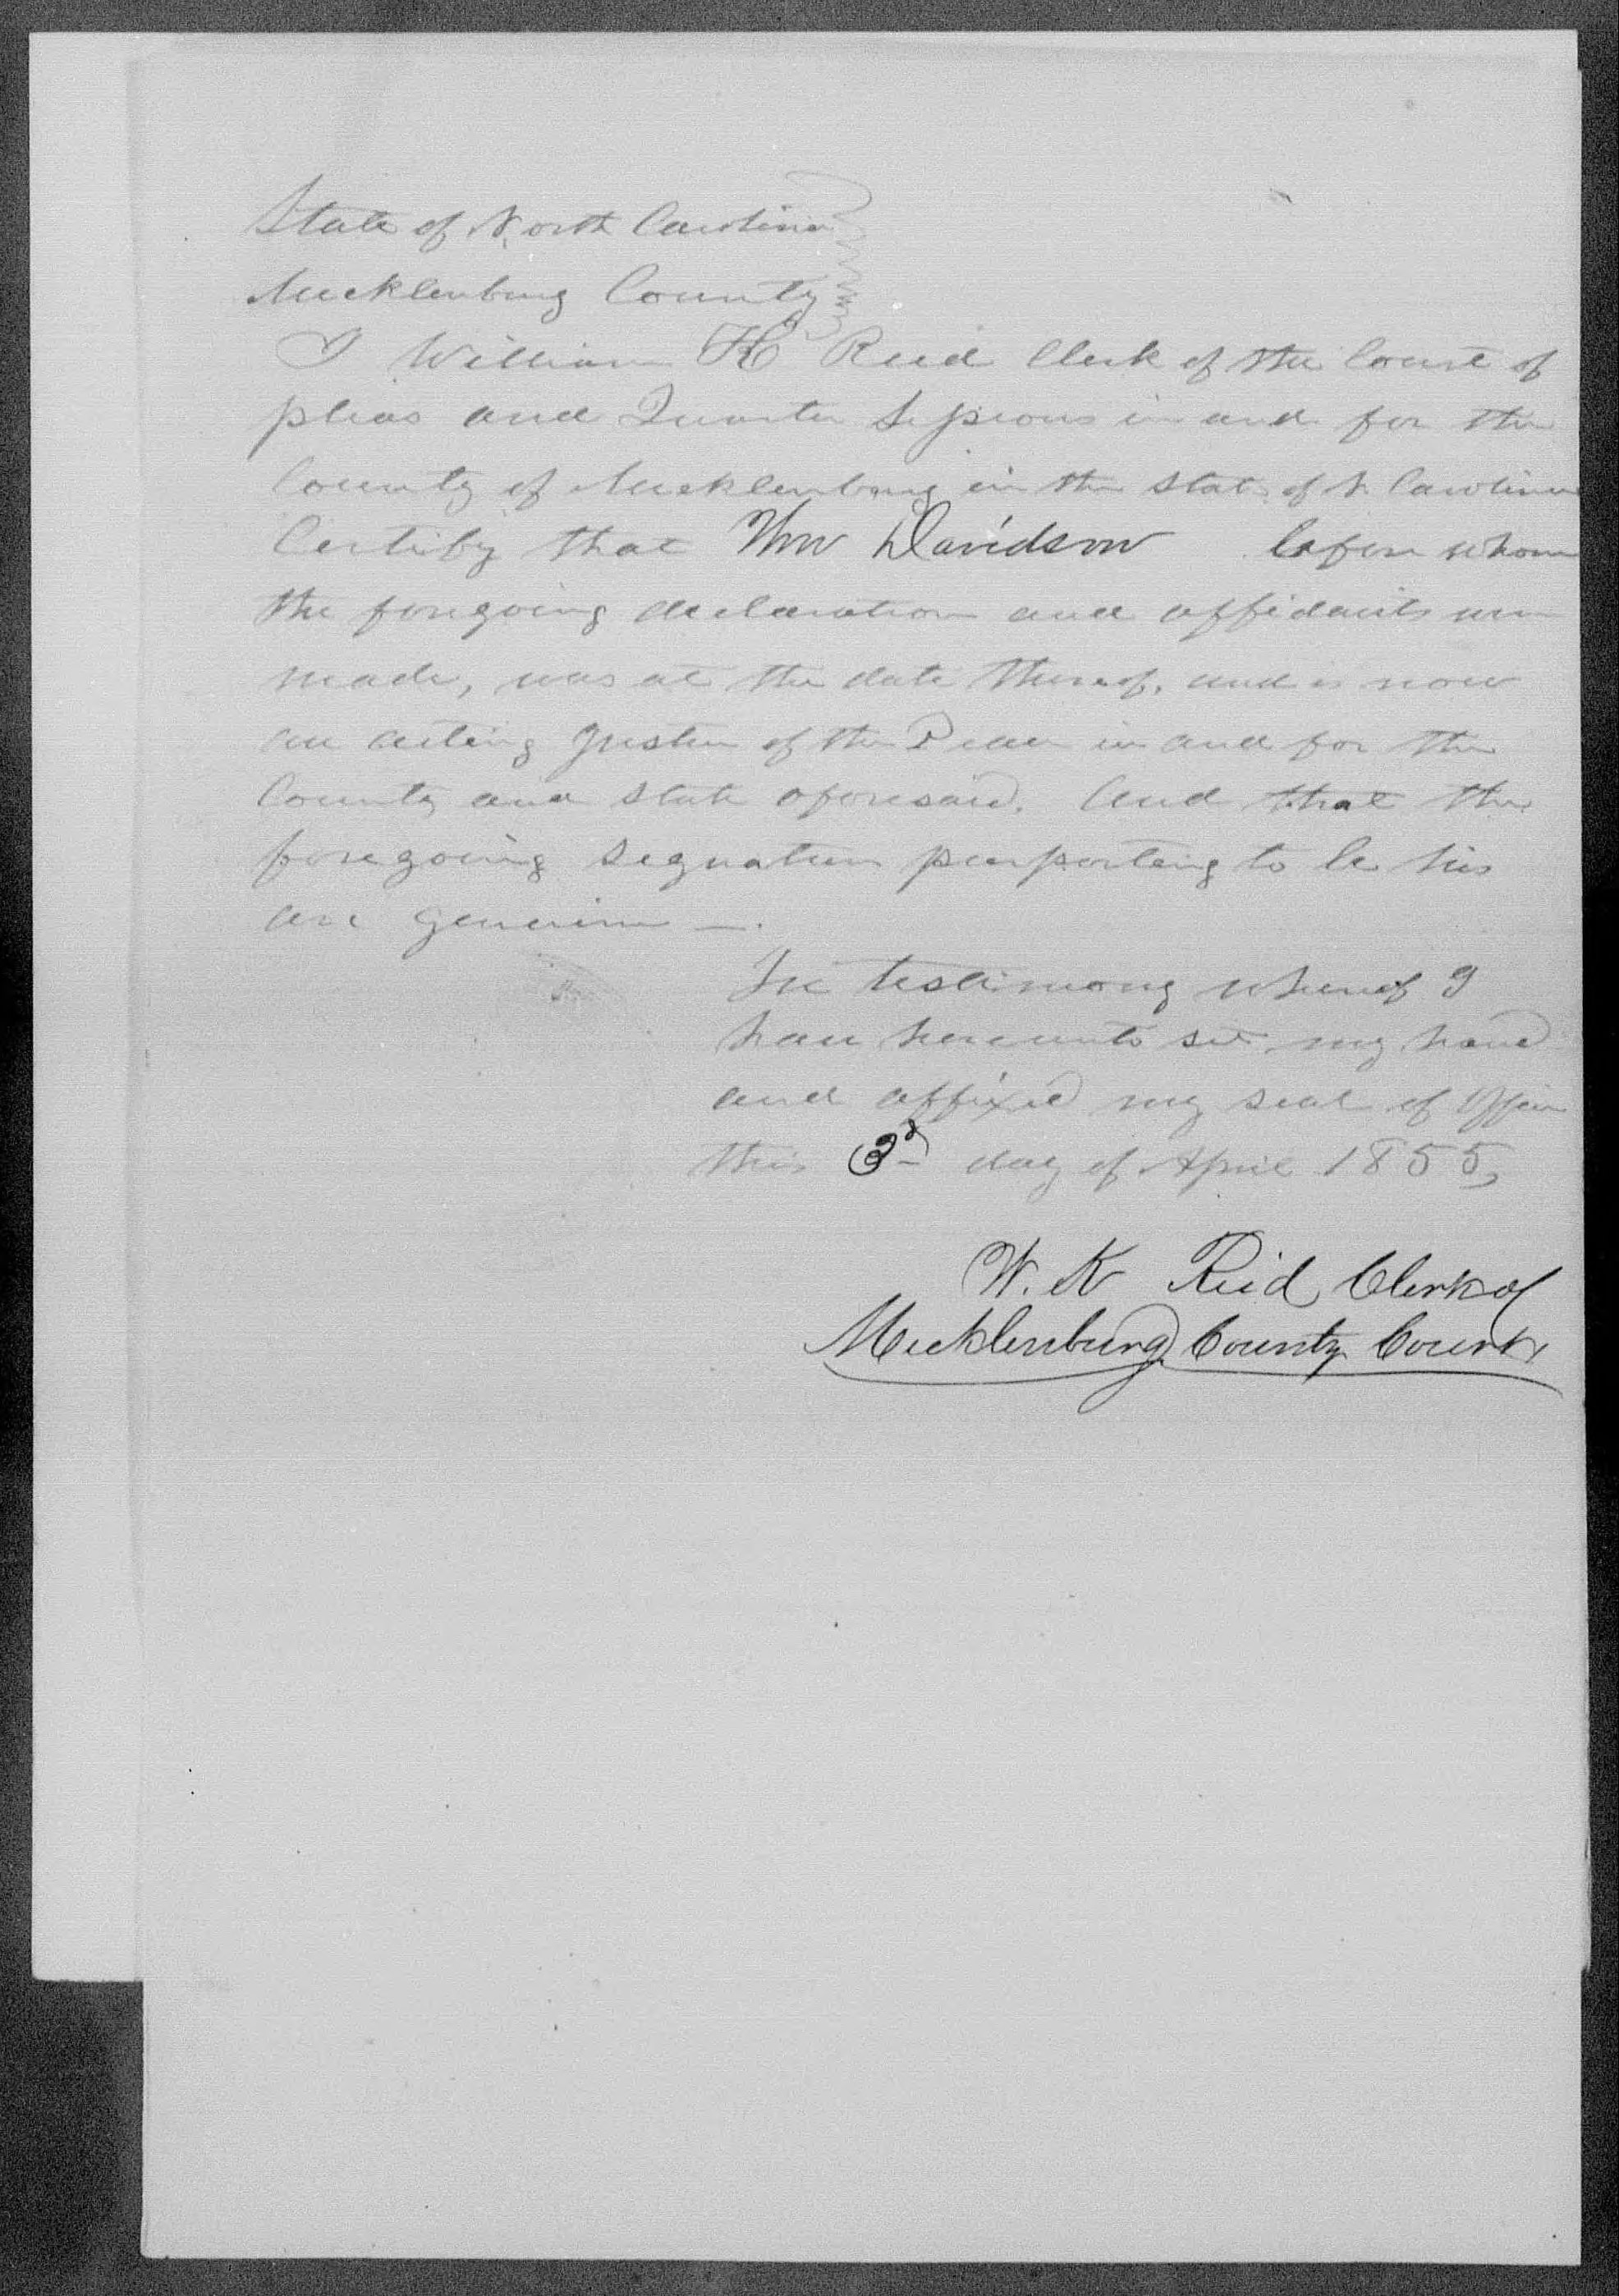 Appointment of William Davidson as Susana Alexander's Power of Attorney, 3 April 1855, page 3